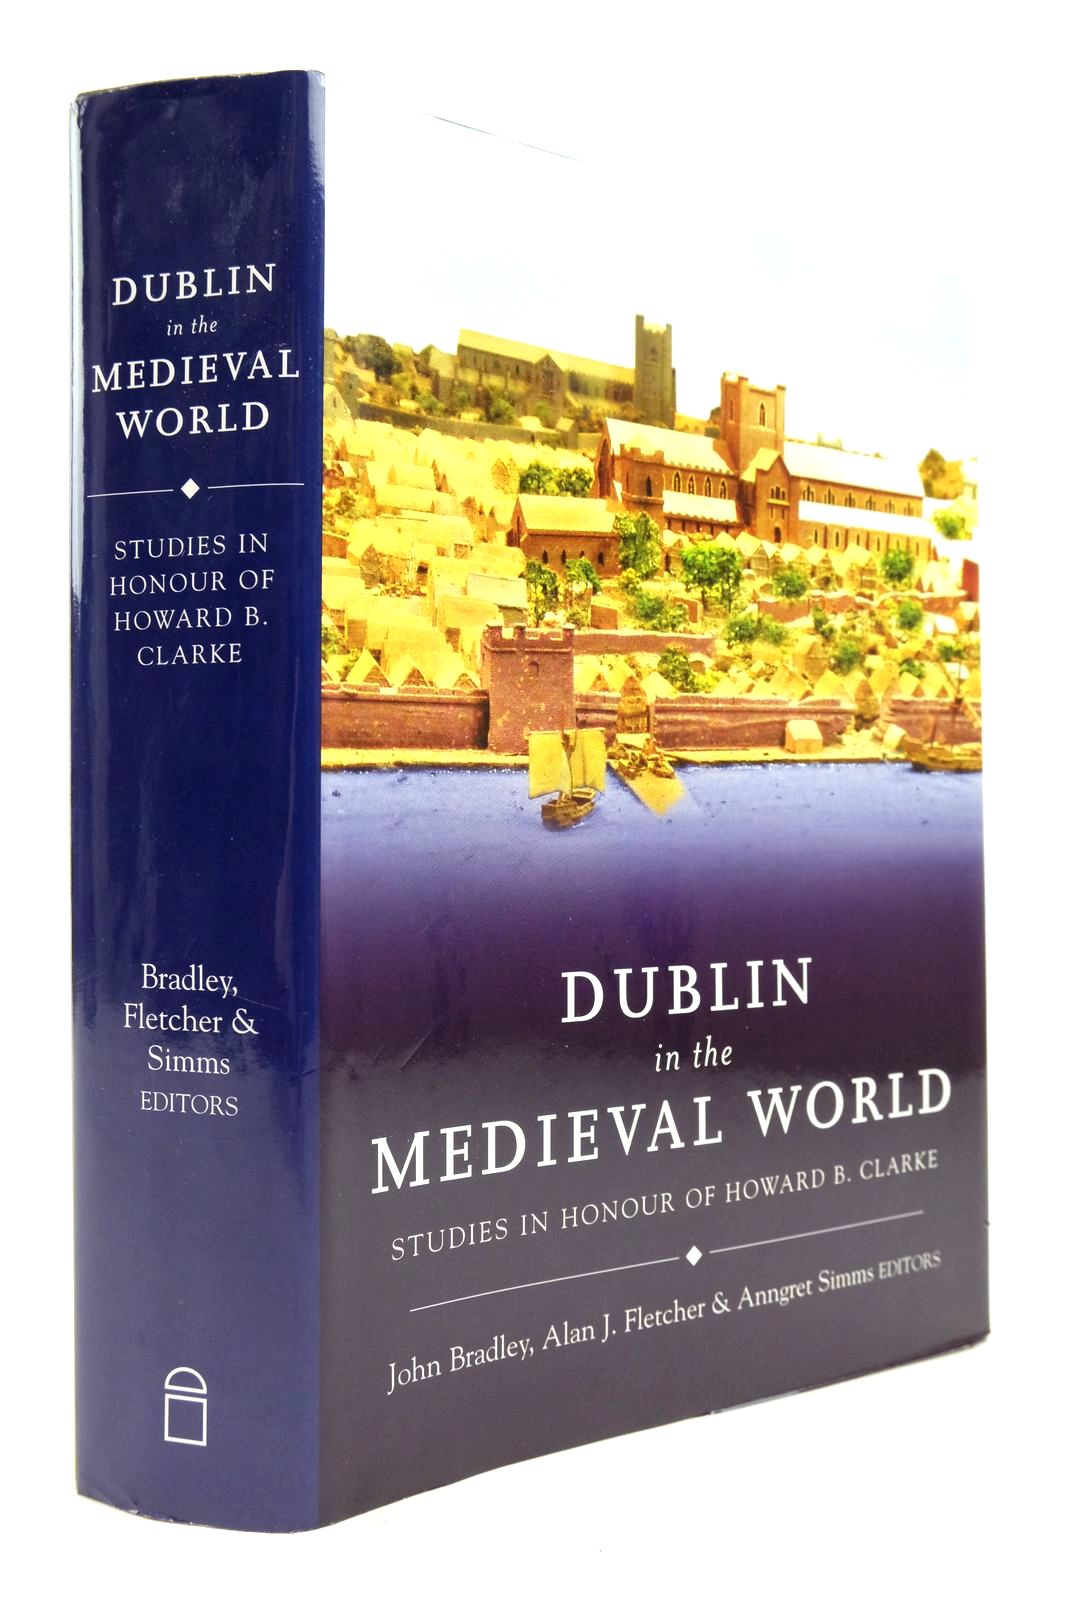 Photo of DUBLIN IN THE MEDIEVAL WORLD: STUDIES IN HONOUR OF HOWARD B. CLARKE written by Bradley, John Fletcher, Alan J. Simms, Anngret published by Four Courts Press (STOCK CODE: 2140425)  for sale by Stella & Rose's Books